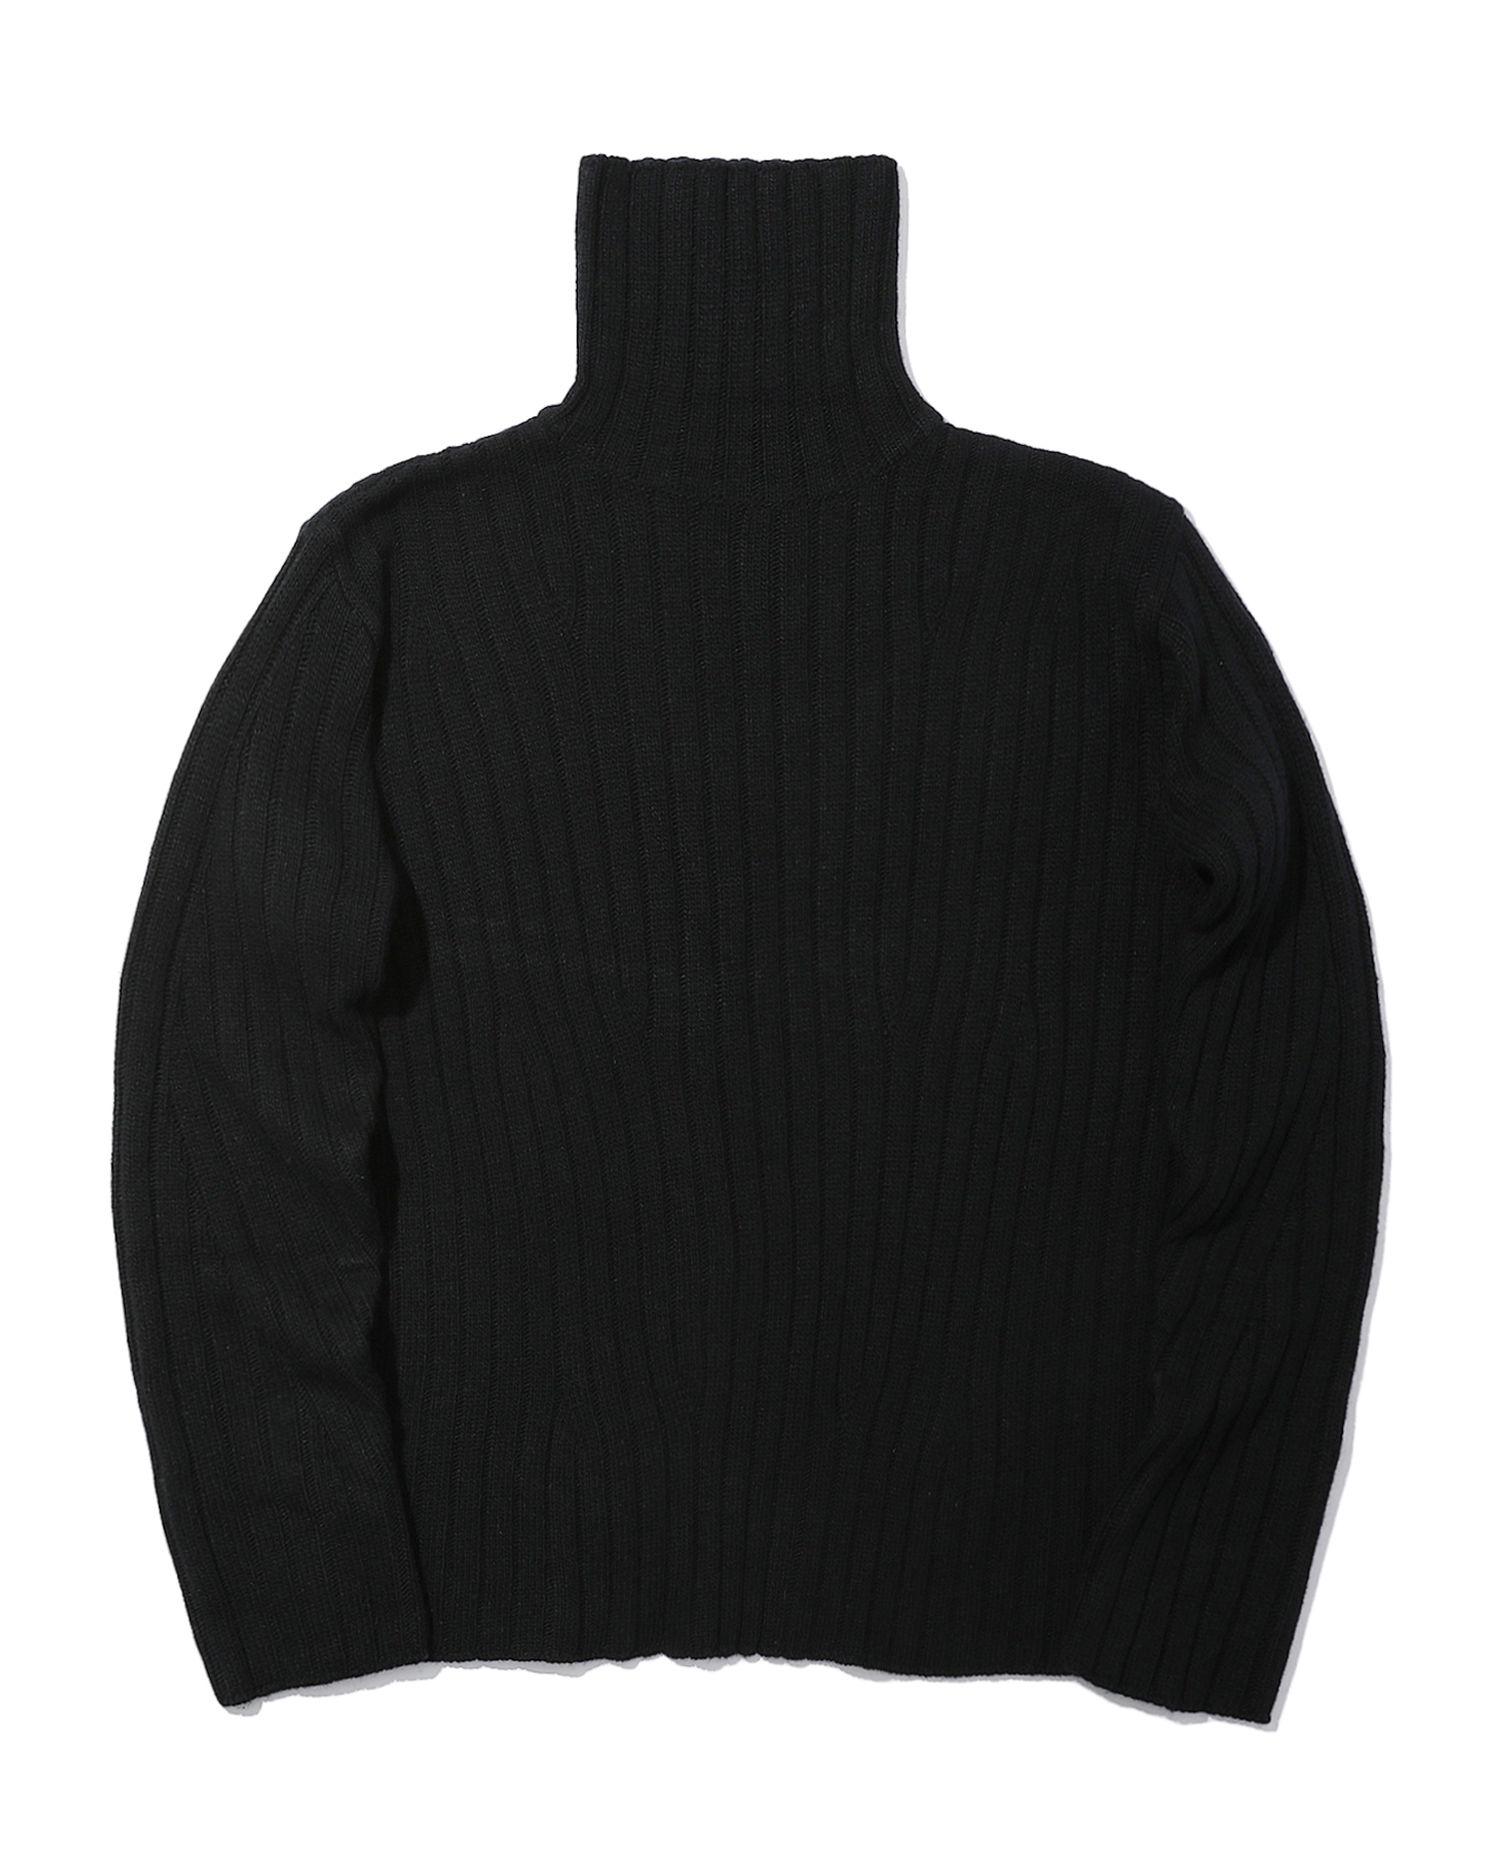 Ribbed turtleneck knit sweater by AMONG